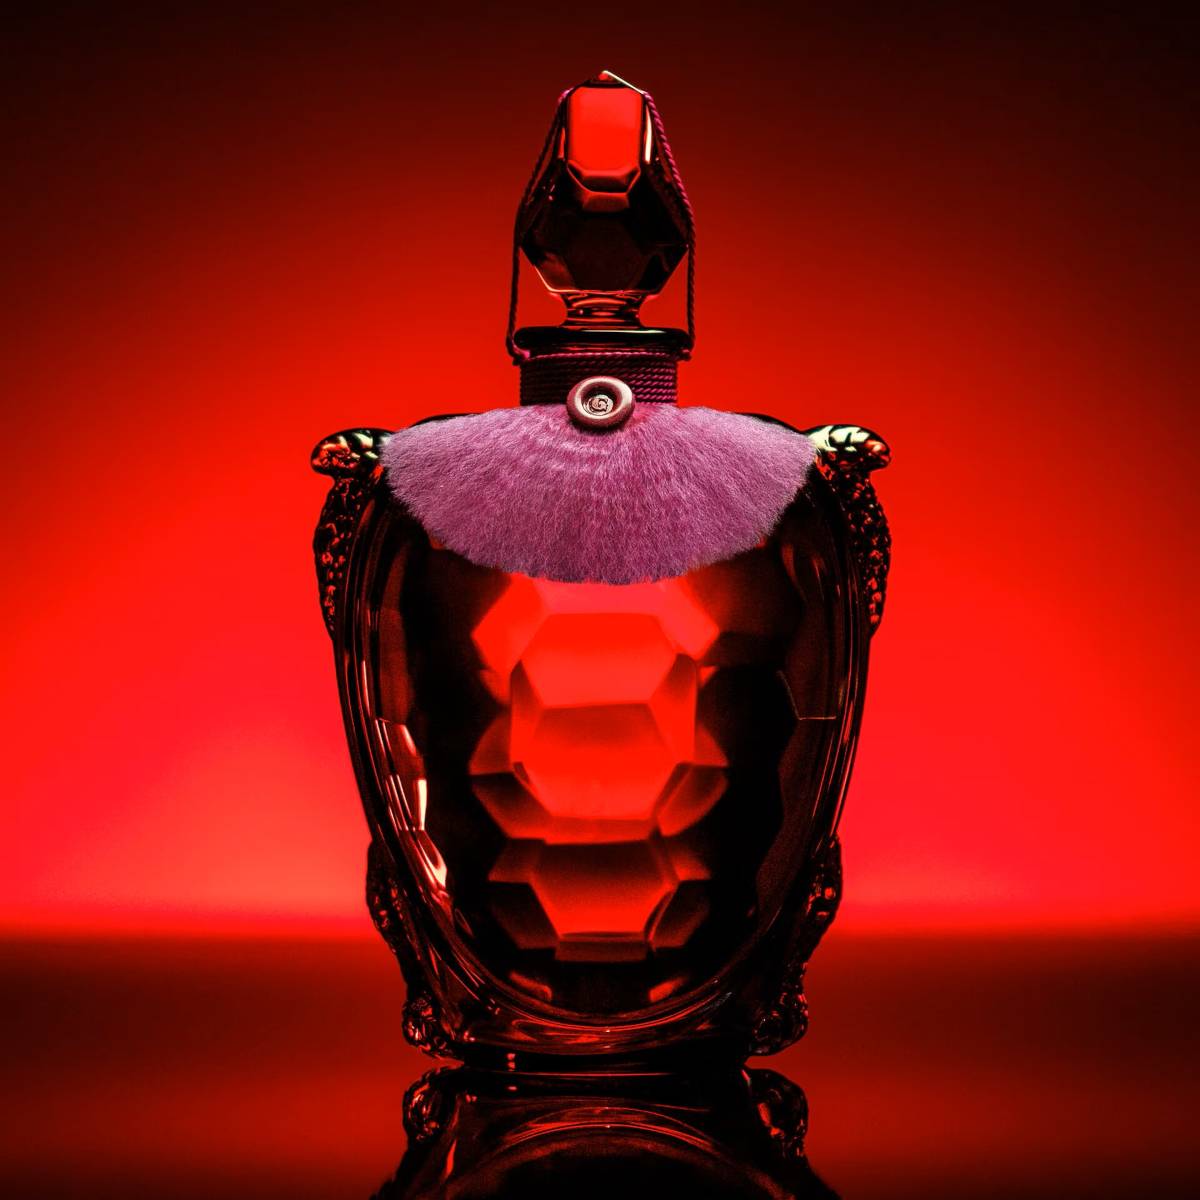 Guerlain Le Flacon Tortue Red Edition by Baccarat profumo donna